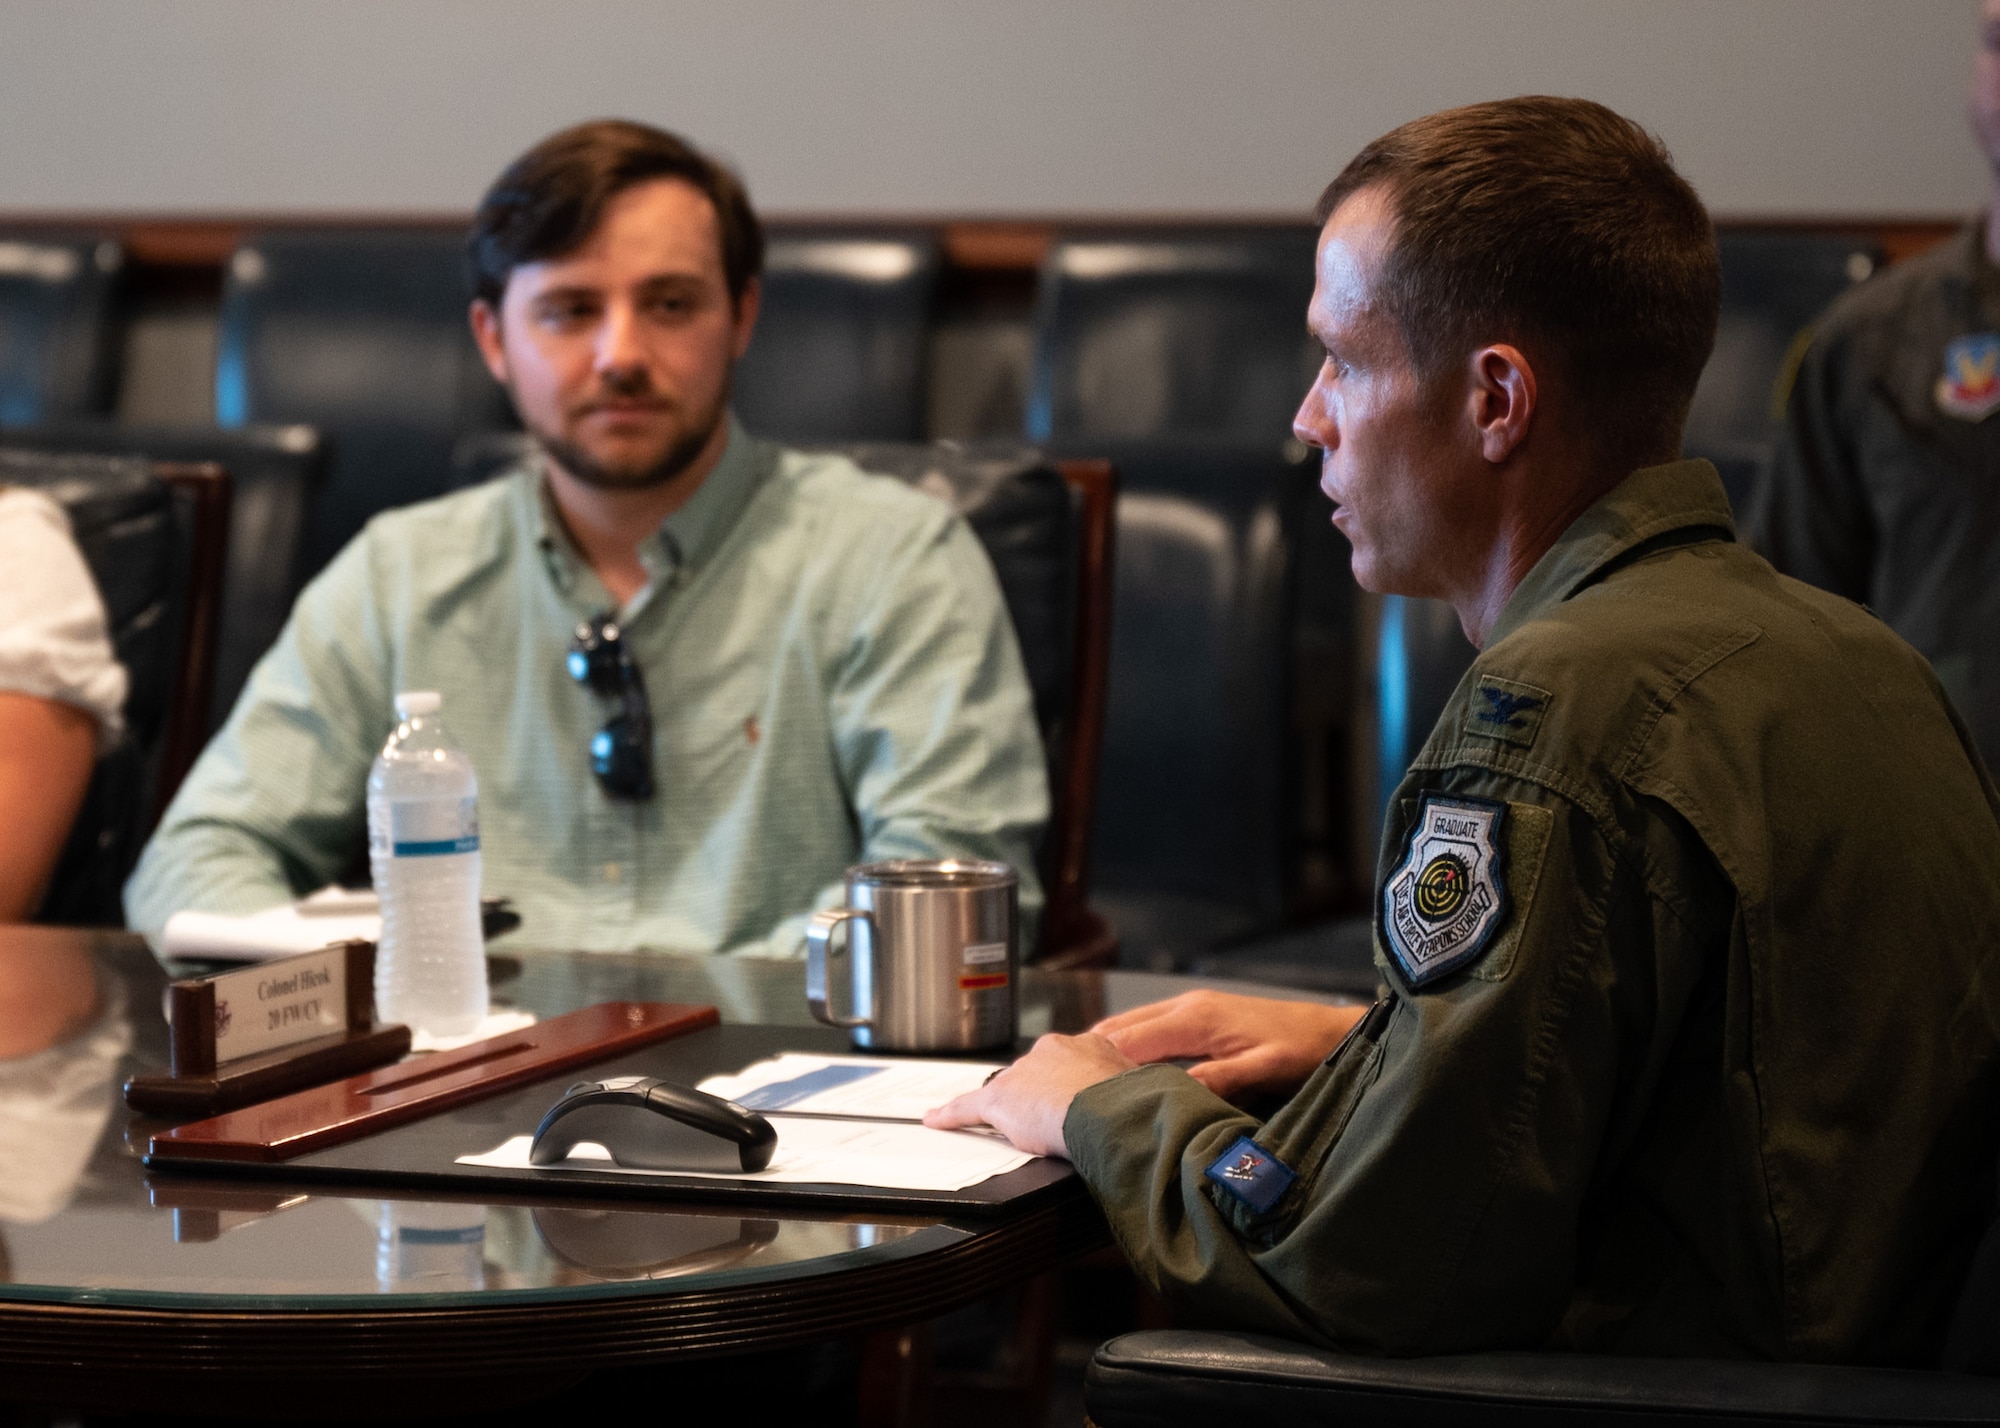 Two individuals have a discussion in a darkened conference room at Shaw Air Force Base, S.C.